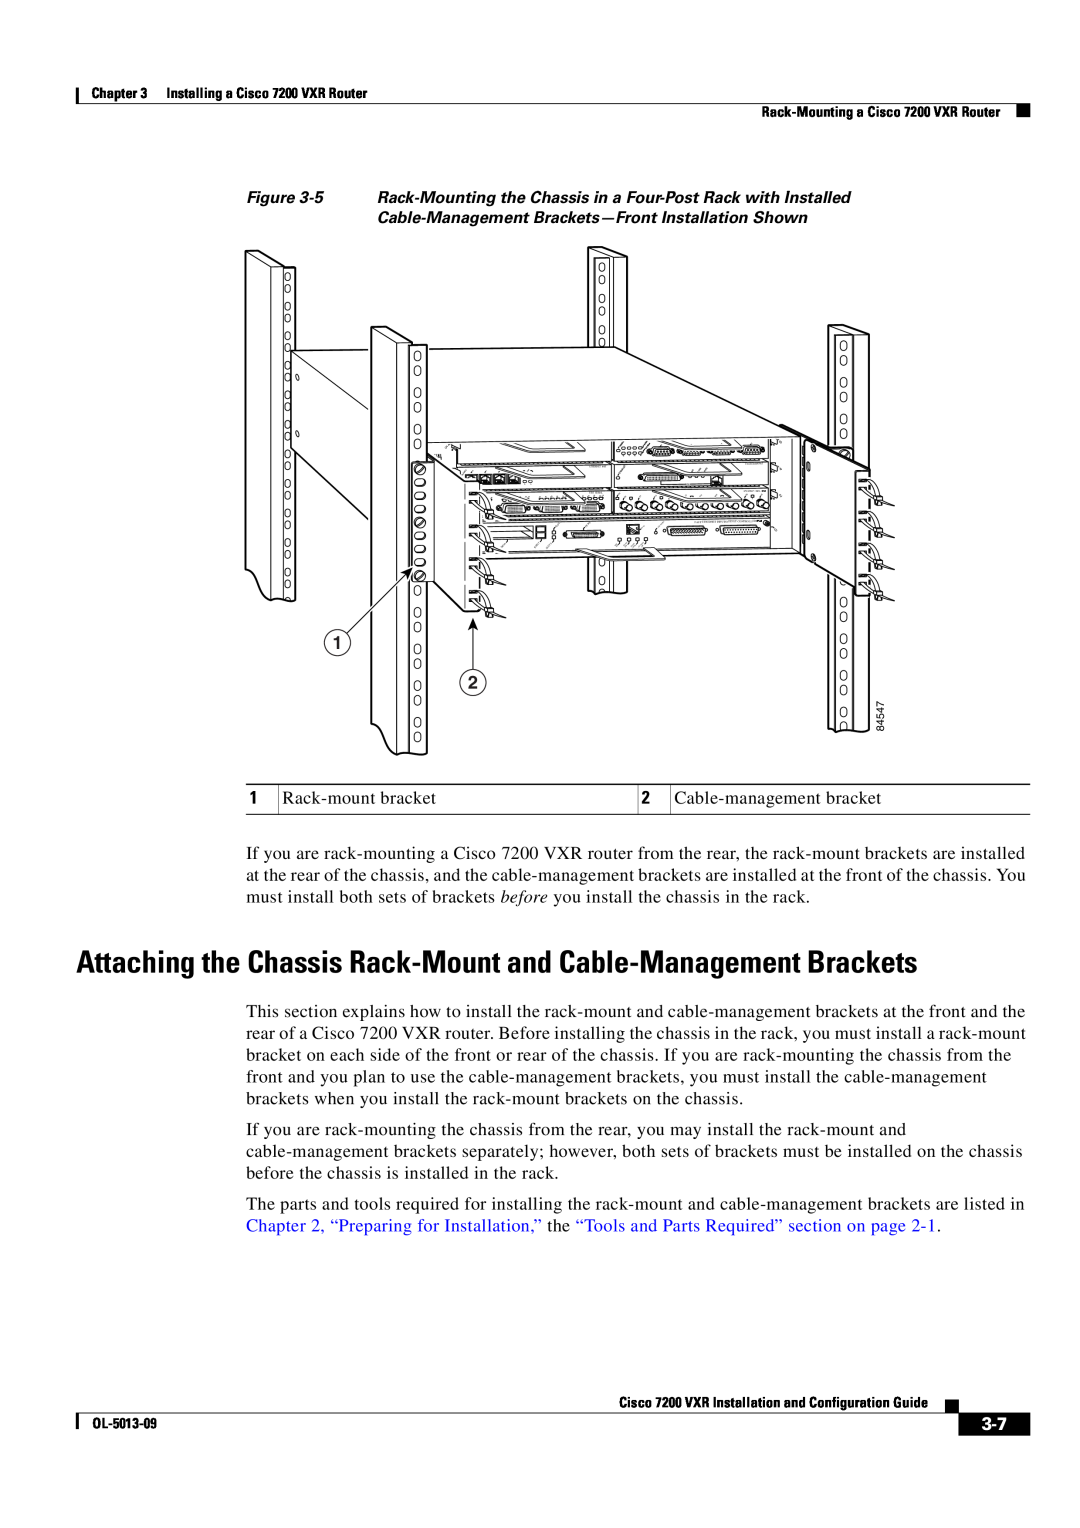 Cisco Systems 7200 VXR manual Attaching the Chassis Rack-Mount and Cable-Management Brackets, Cisco Series 